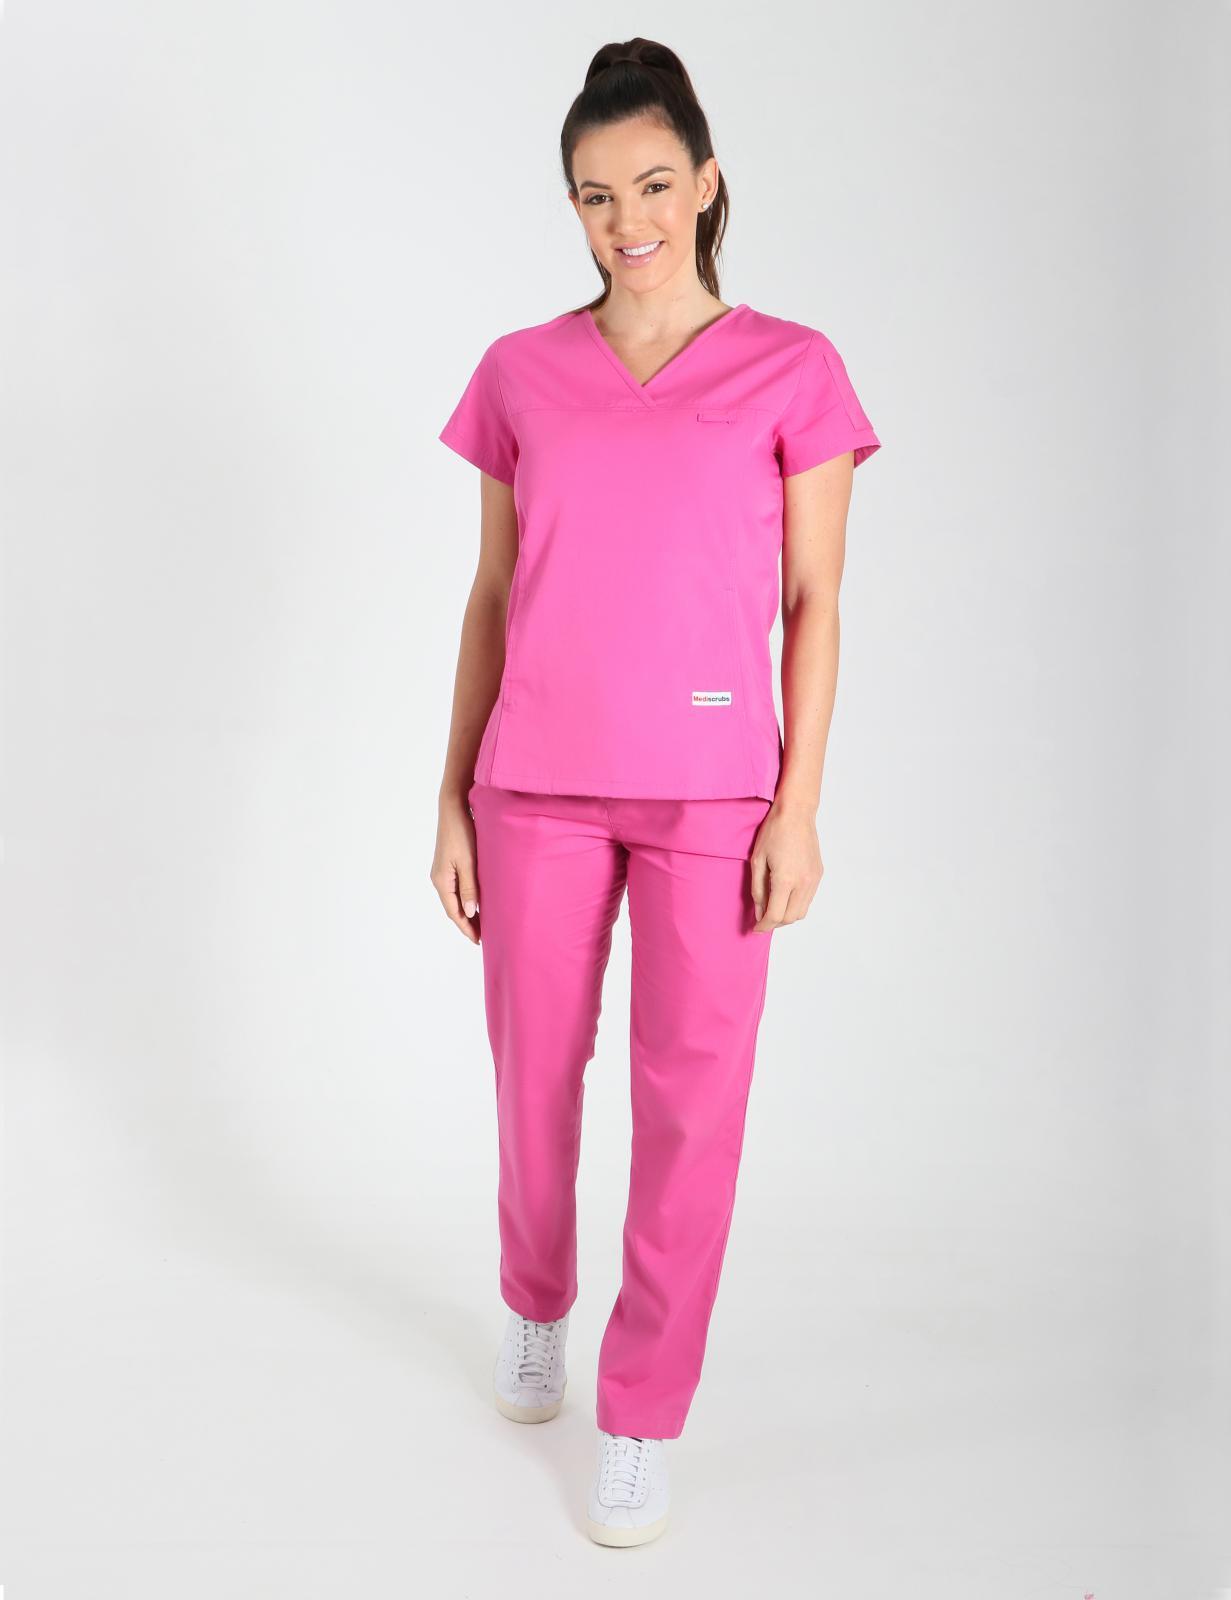 Women's Fit Solid Scrub Top - Pink - XX Small